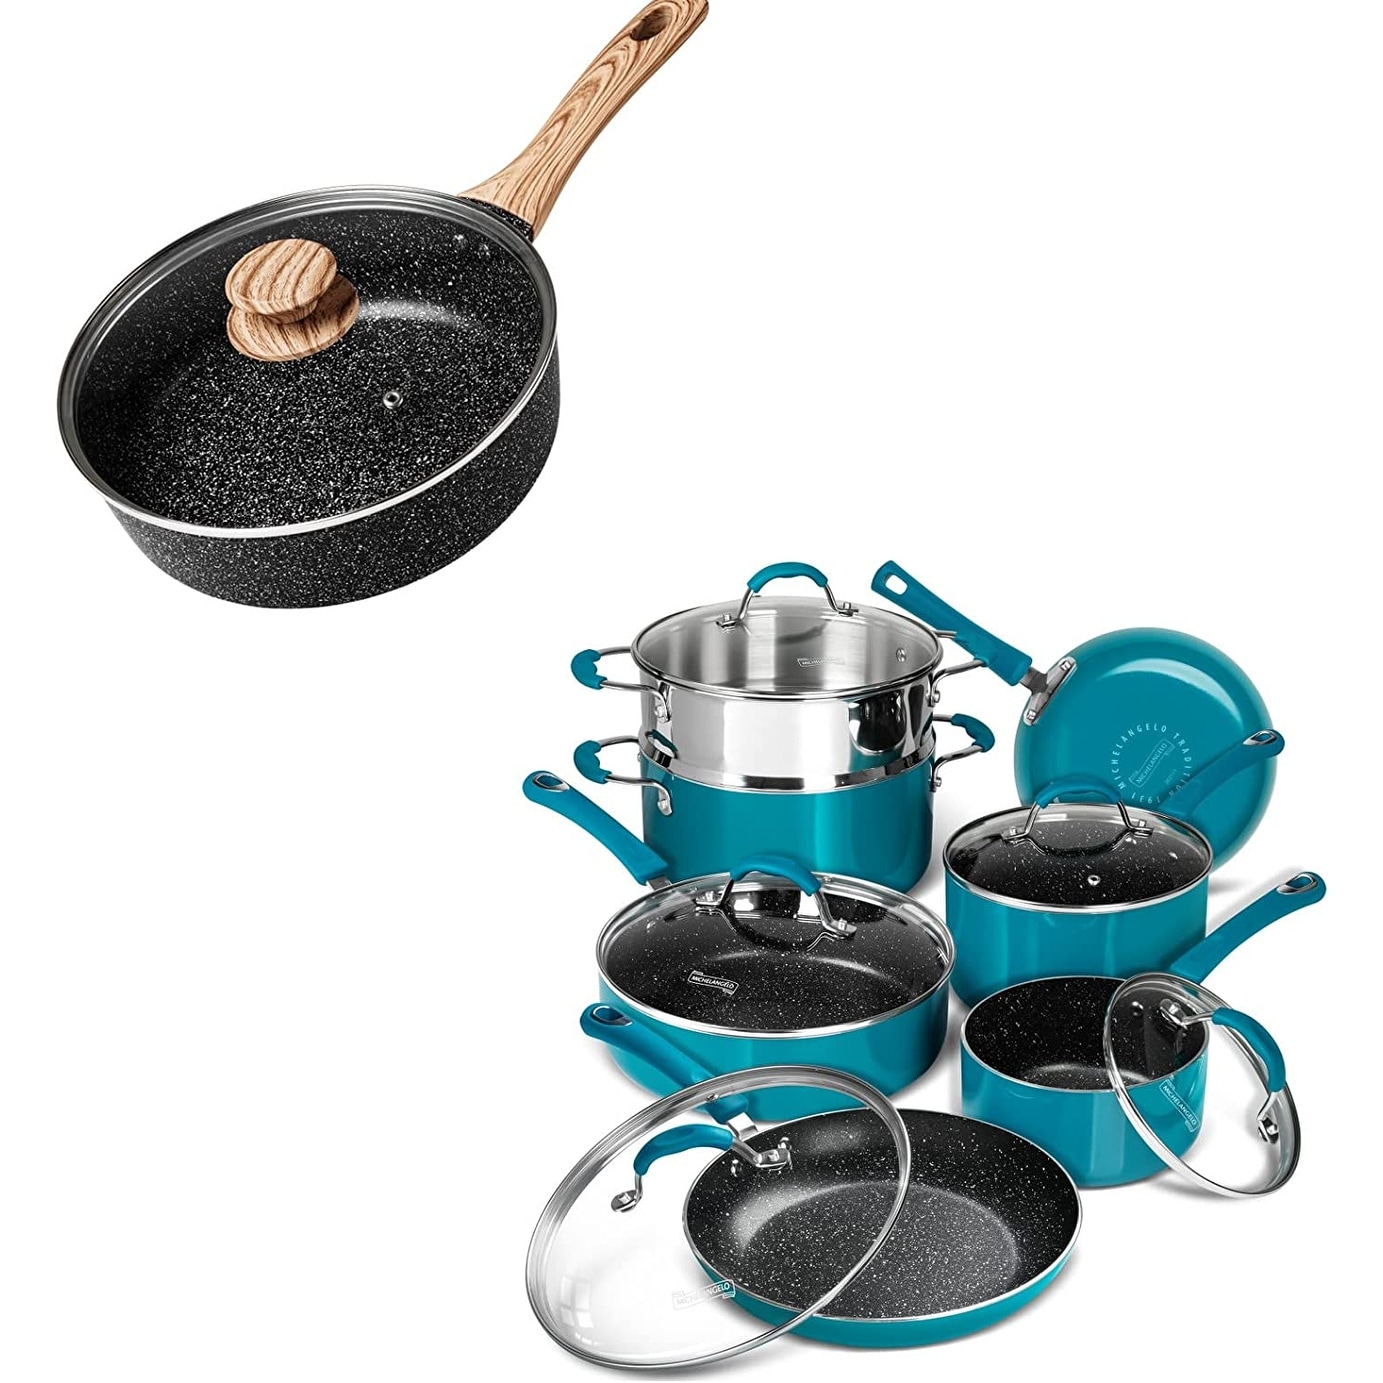 https://ak1.ostkcdn.com/images/products/is/images/direct/7d89ff4ac7d3cec88c5d4f5a1e811e1f78bd93d2/Pots-and-Pans-Set-Nonstick%2C-12-Piece-Kitchen-Cookware-Sets%2C-Enamel-Cookware-with-Granite-Nonstick-Coating.jpg